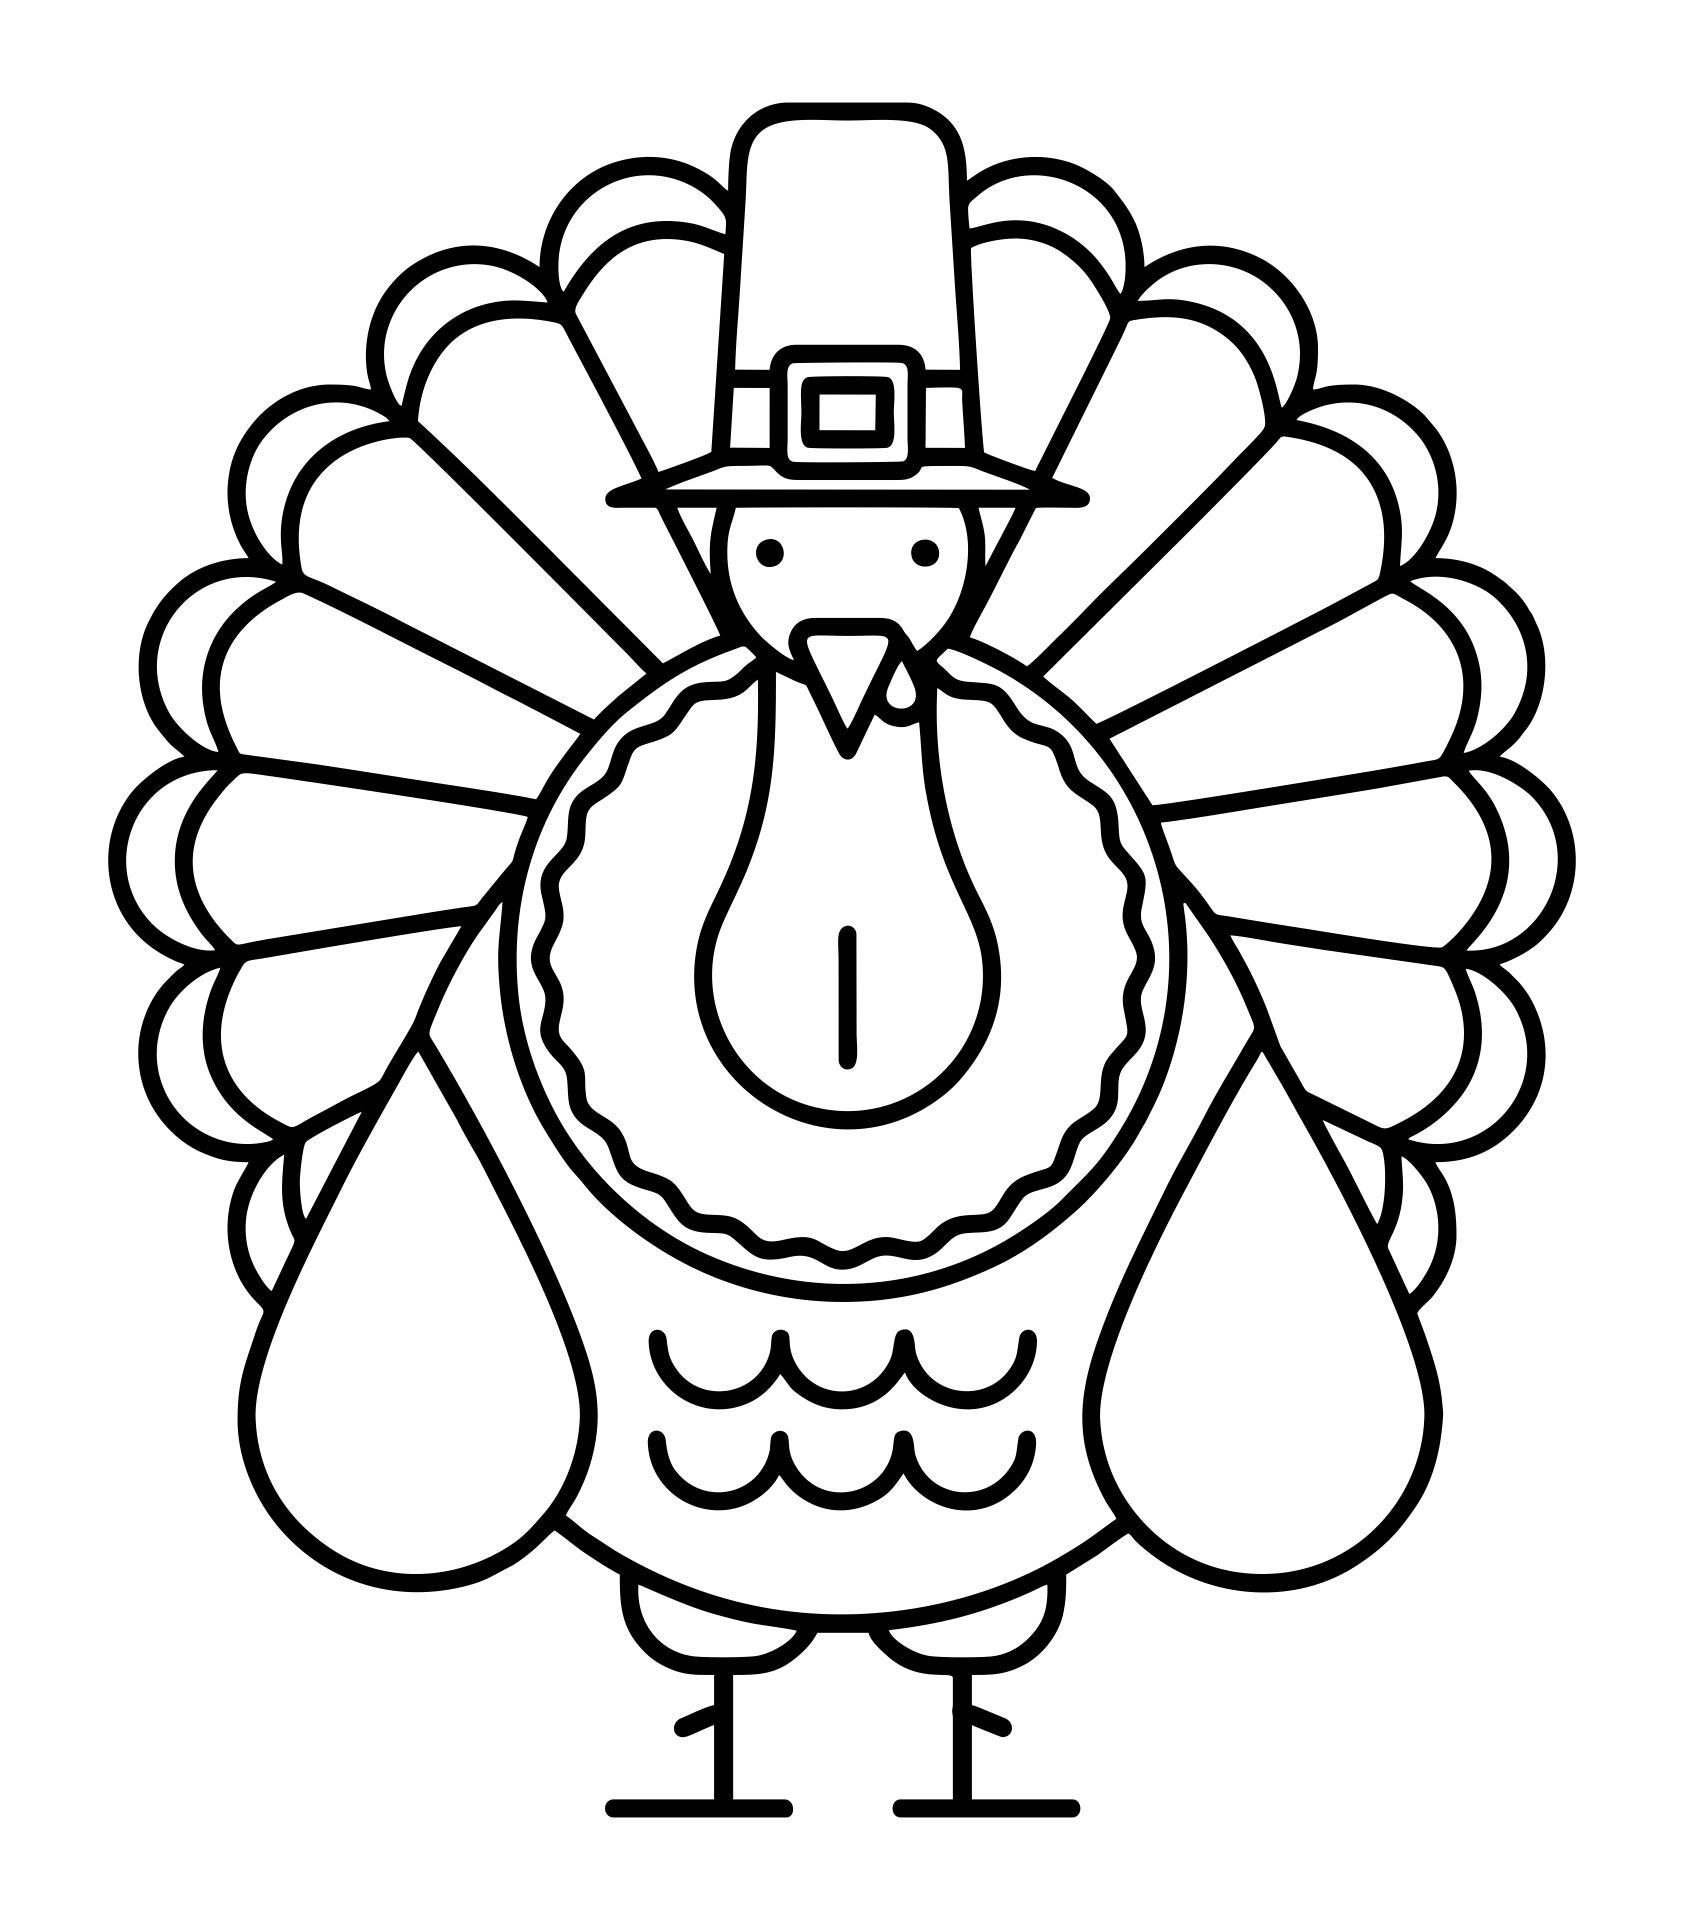 10-best-happy-thanksgiving-free-printable-templates-pdf-for-free-at